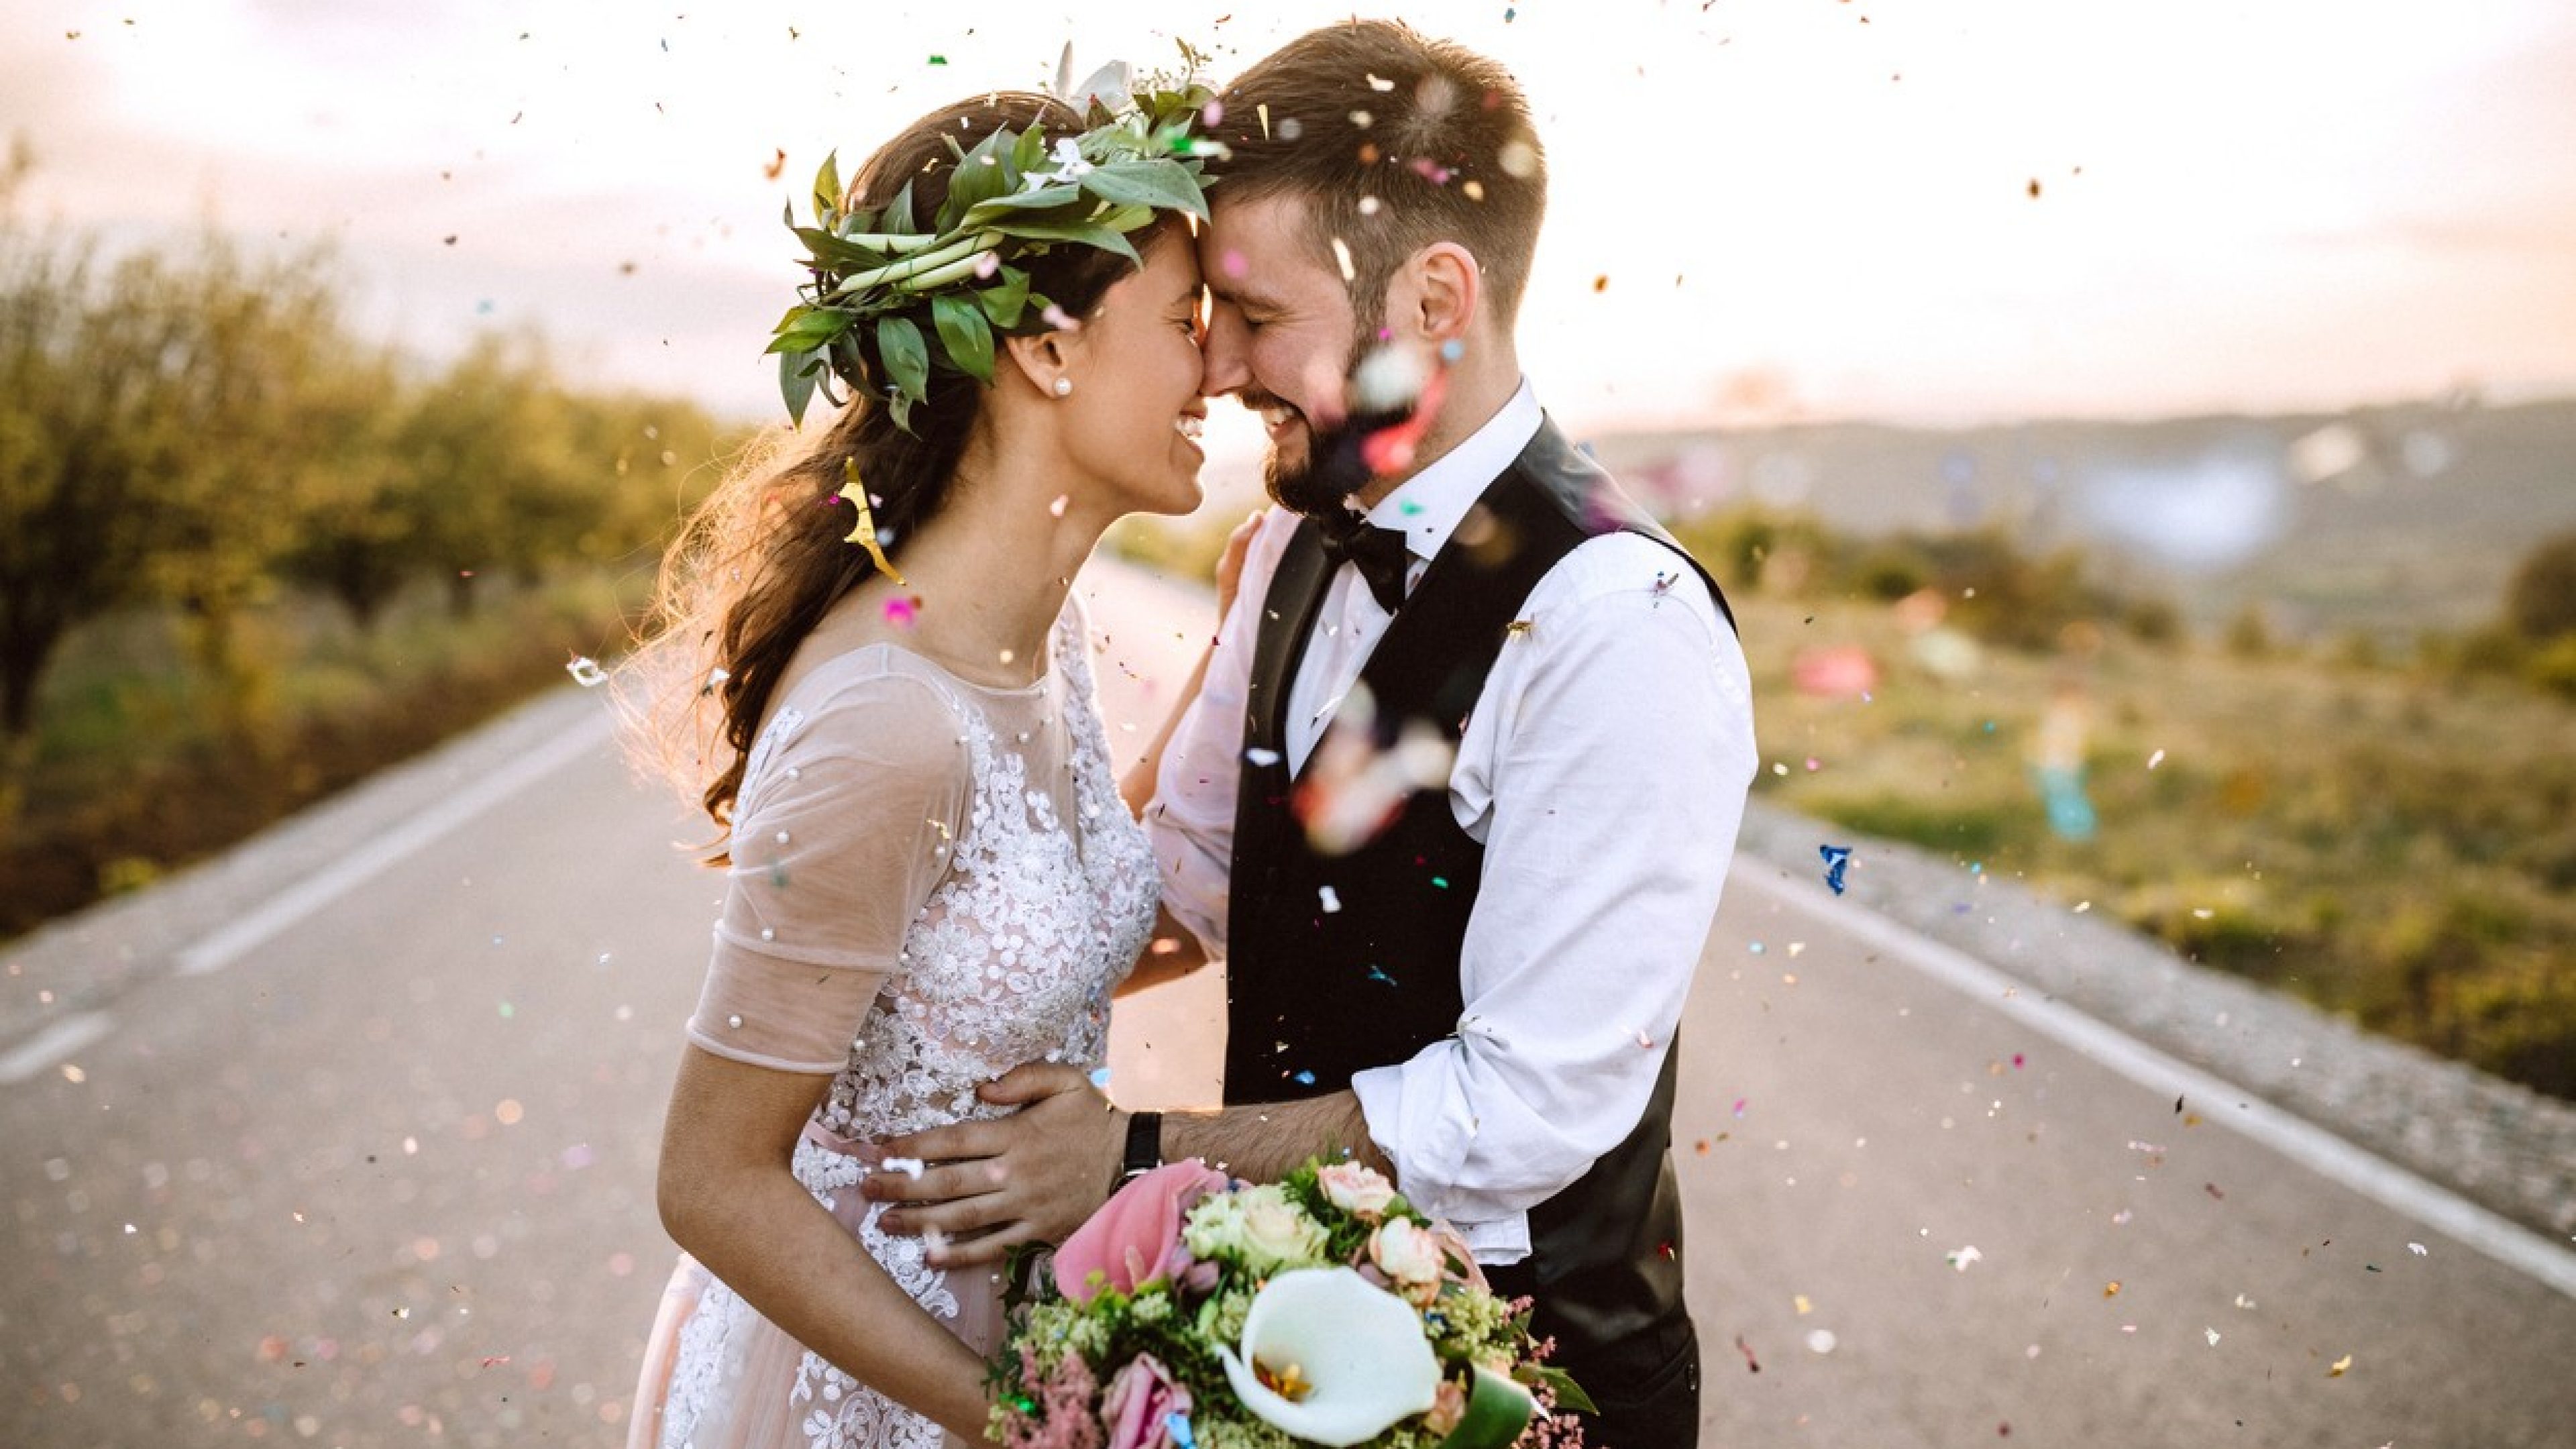 Getting married: what are the pros and cons? – Swiss Life